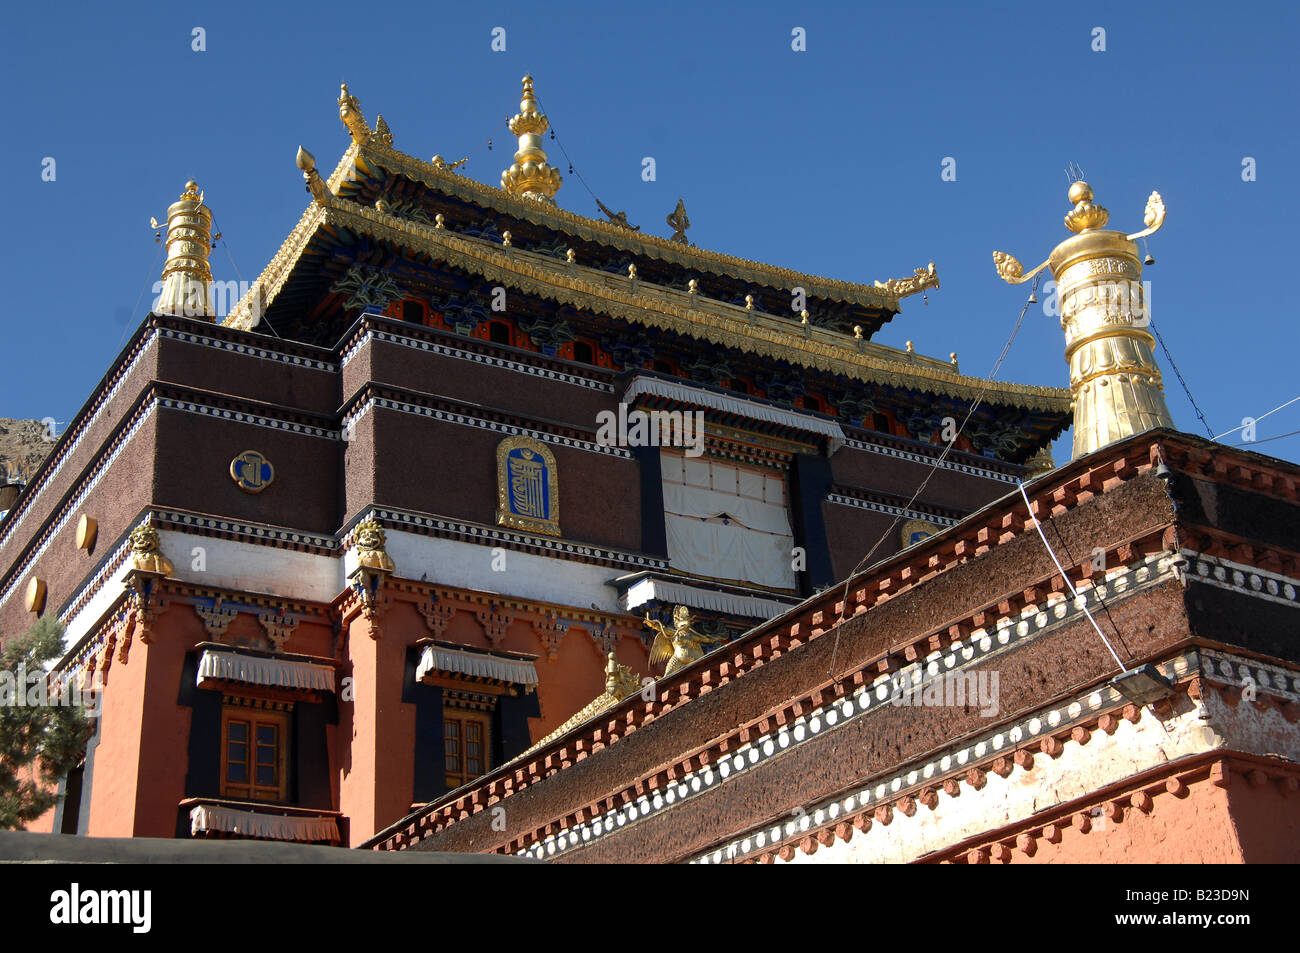 Low angle view of temple, Jokhang Temple, Lhasa, Tibet, China Stock Photo